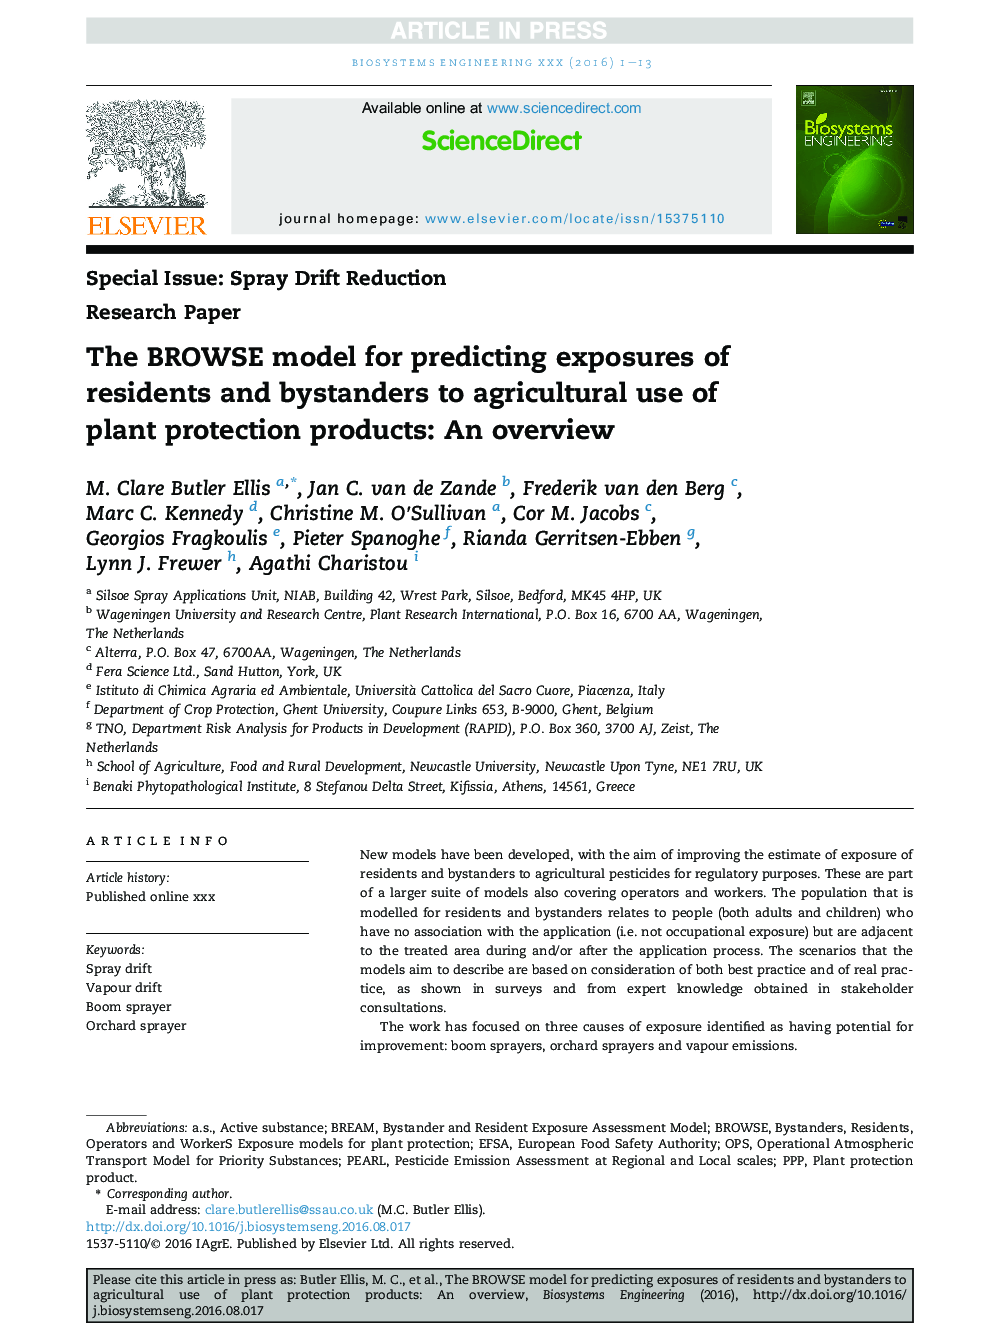 The BROWSE model for predicting exposures of residents and bystanders to agricultural use of plant protection products: An overview